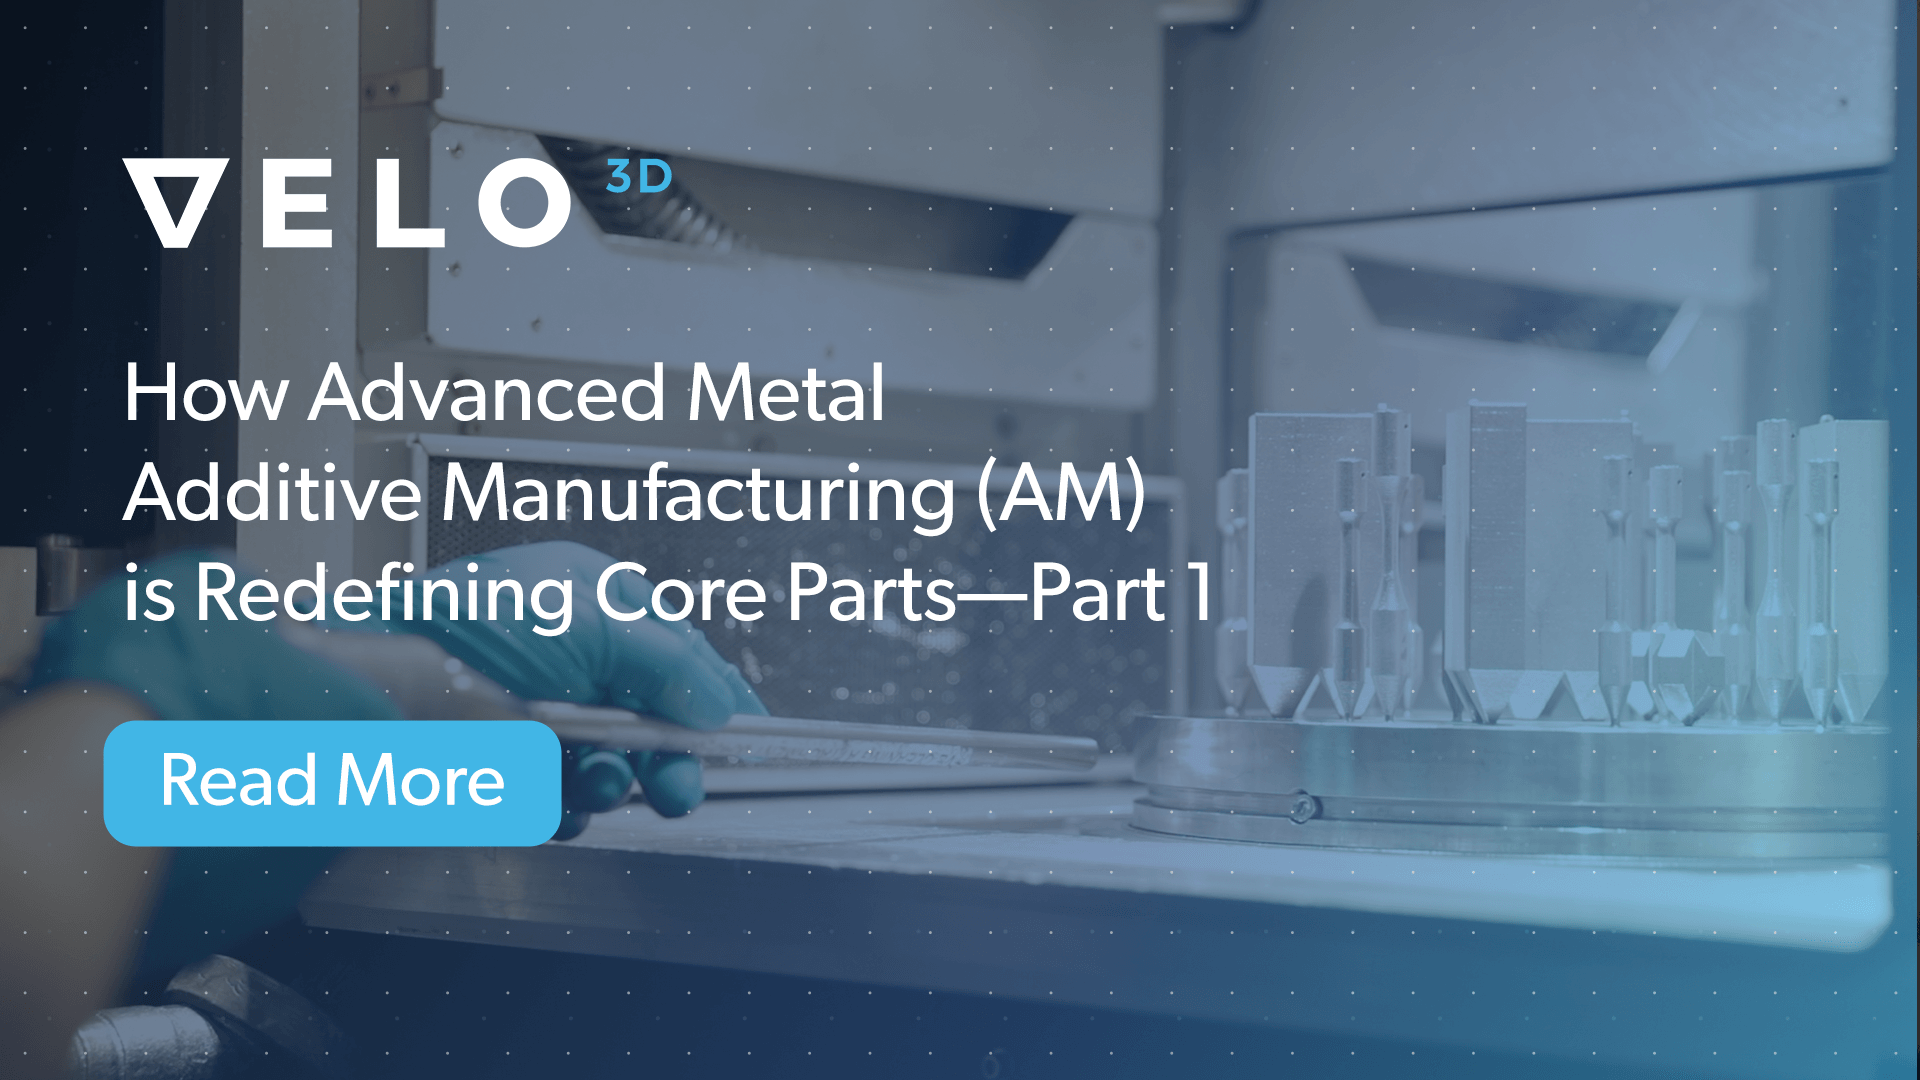 How Advanced Metal Additive Manufacturing (AM) is Redefining Core Parts—Part 1